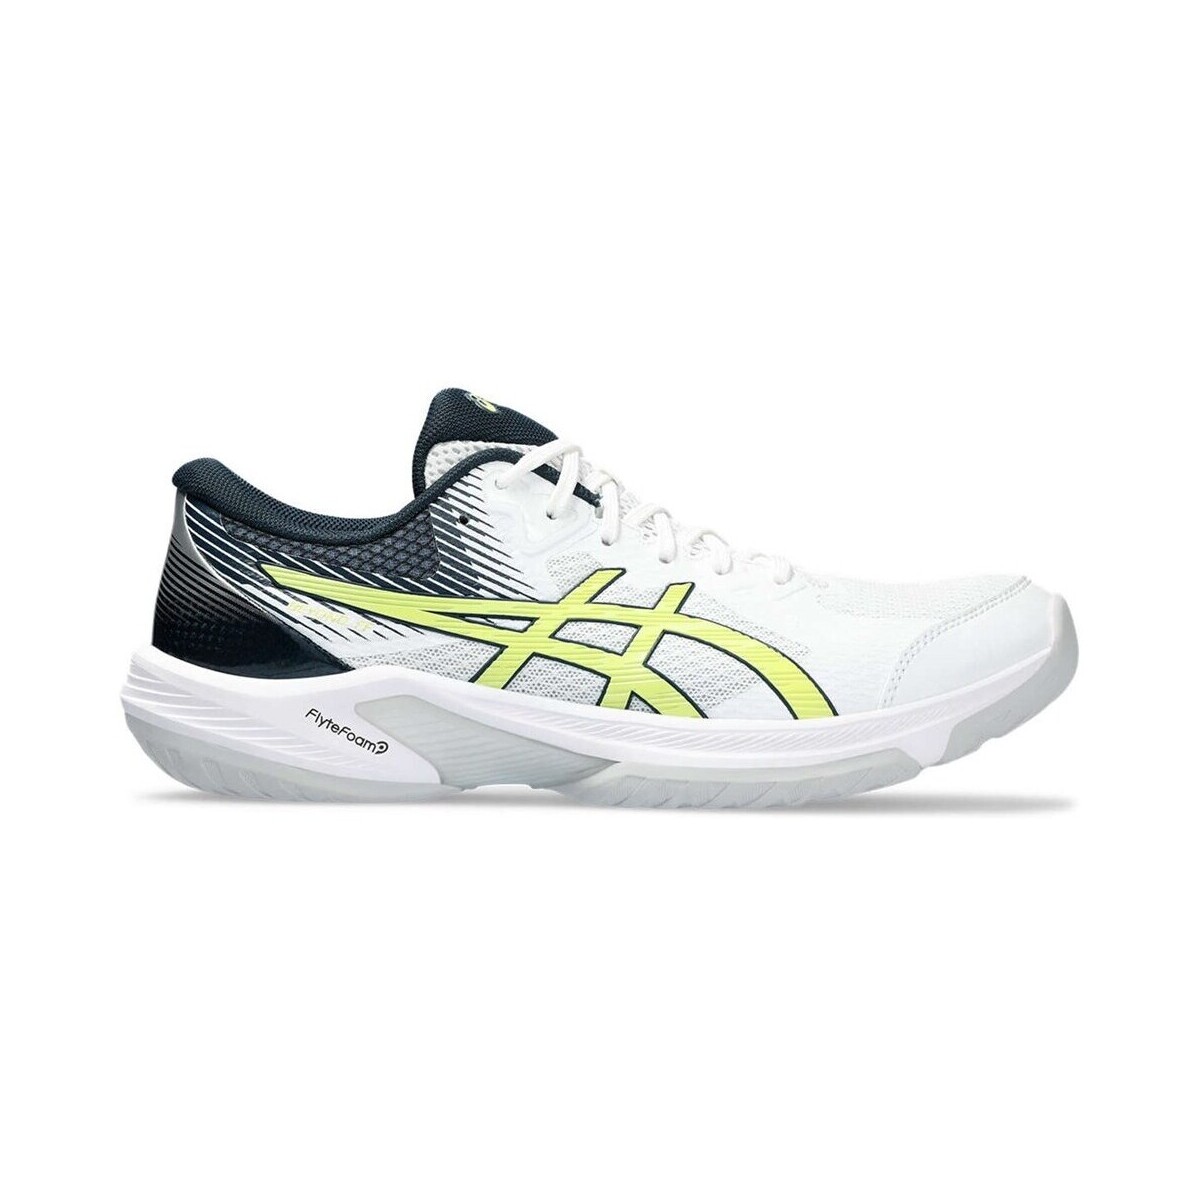 asics  beyond ff white glow yellow  men's indoor sports trainers (shoes) in white